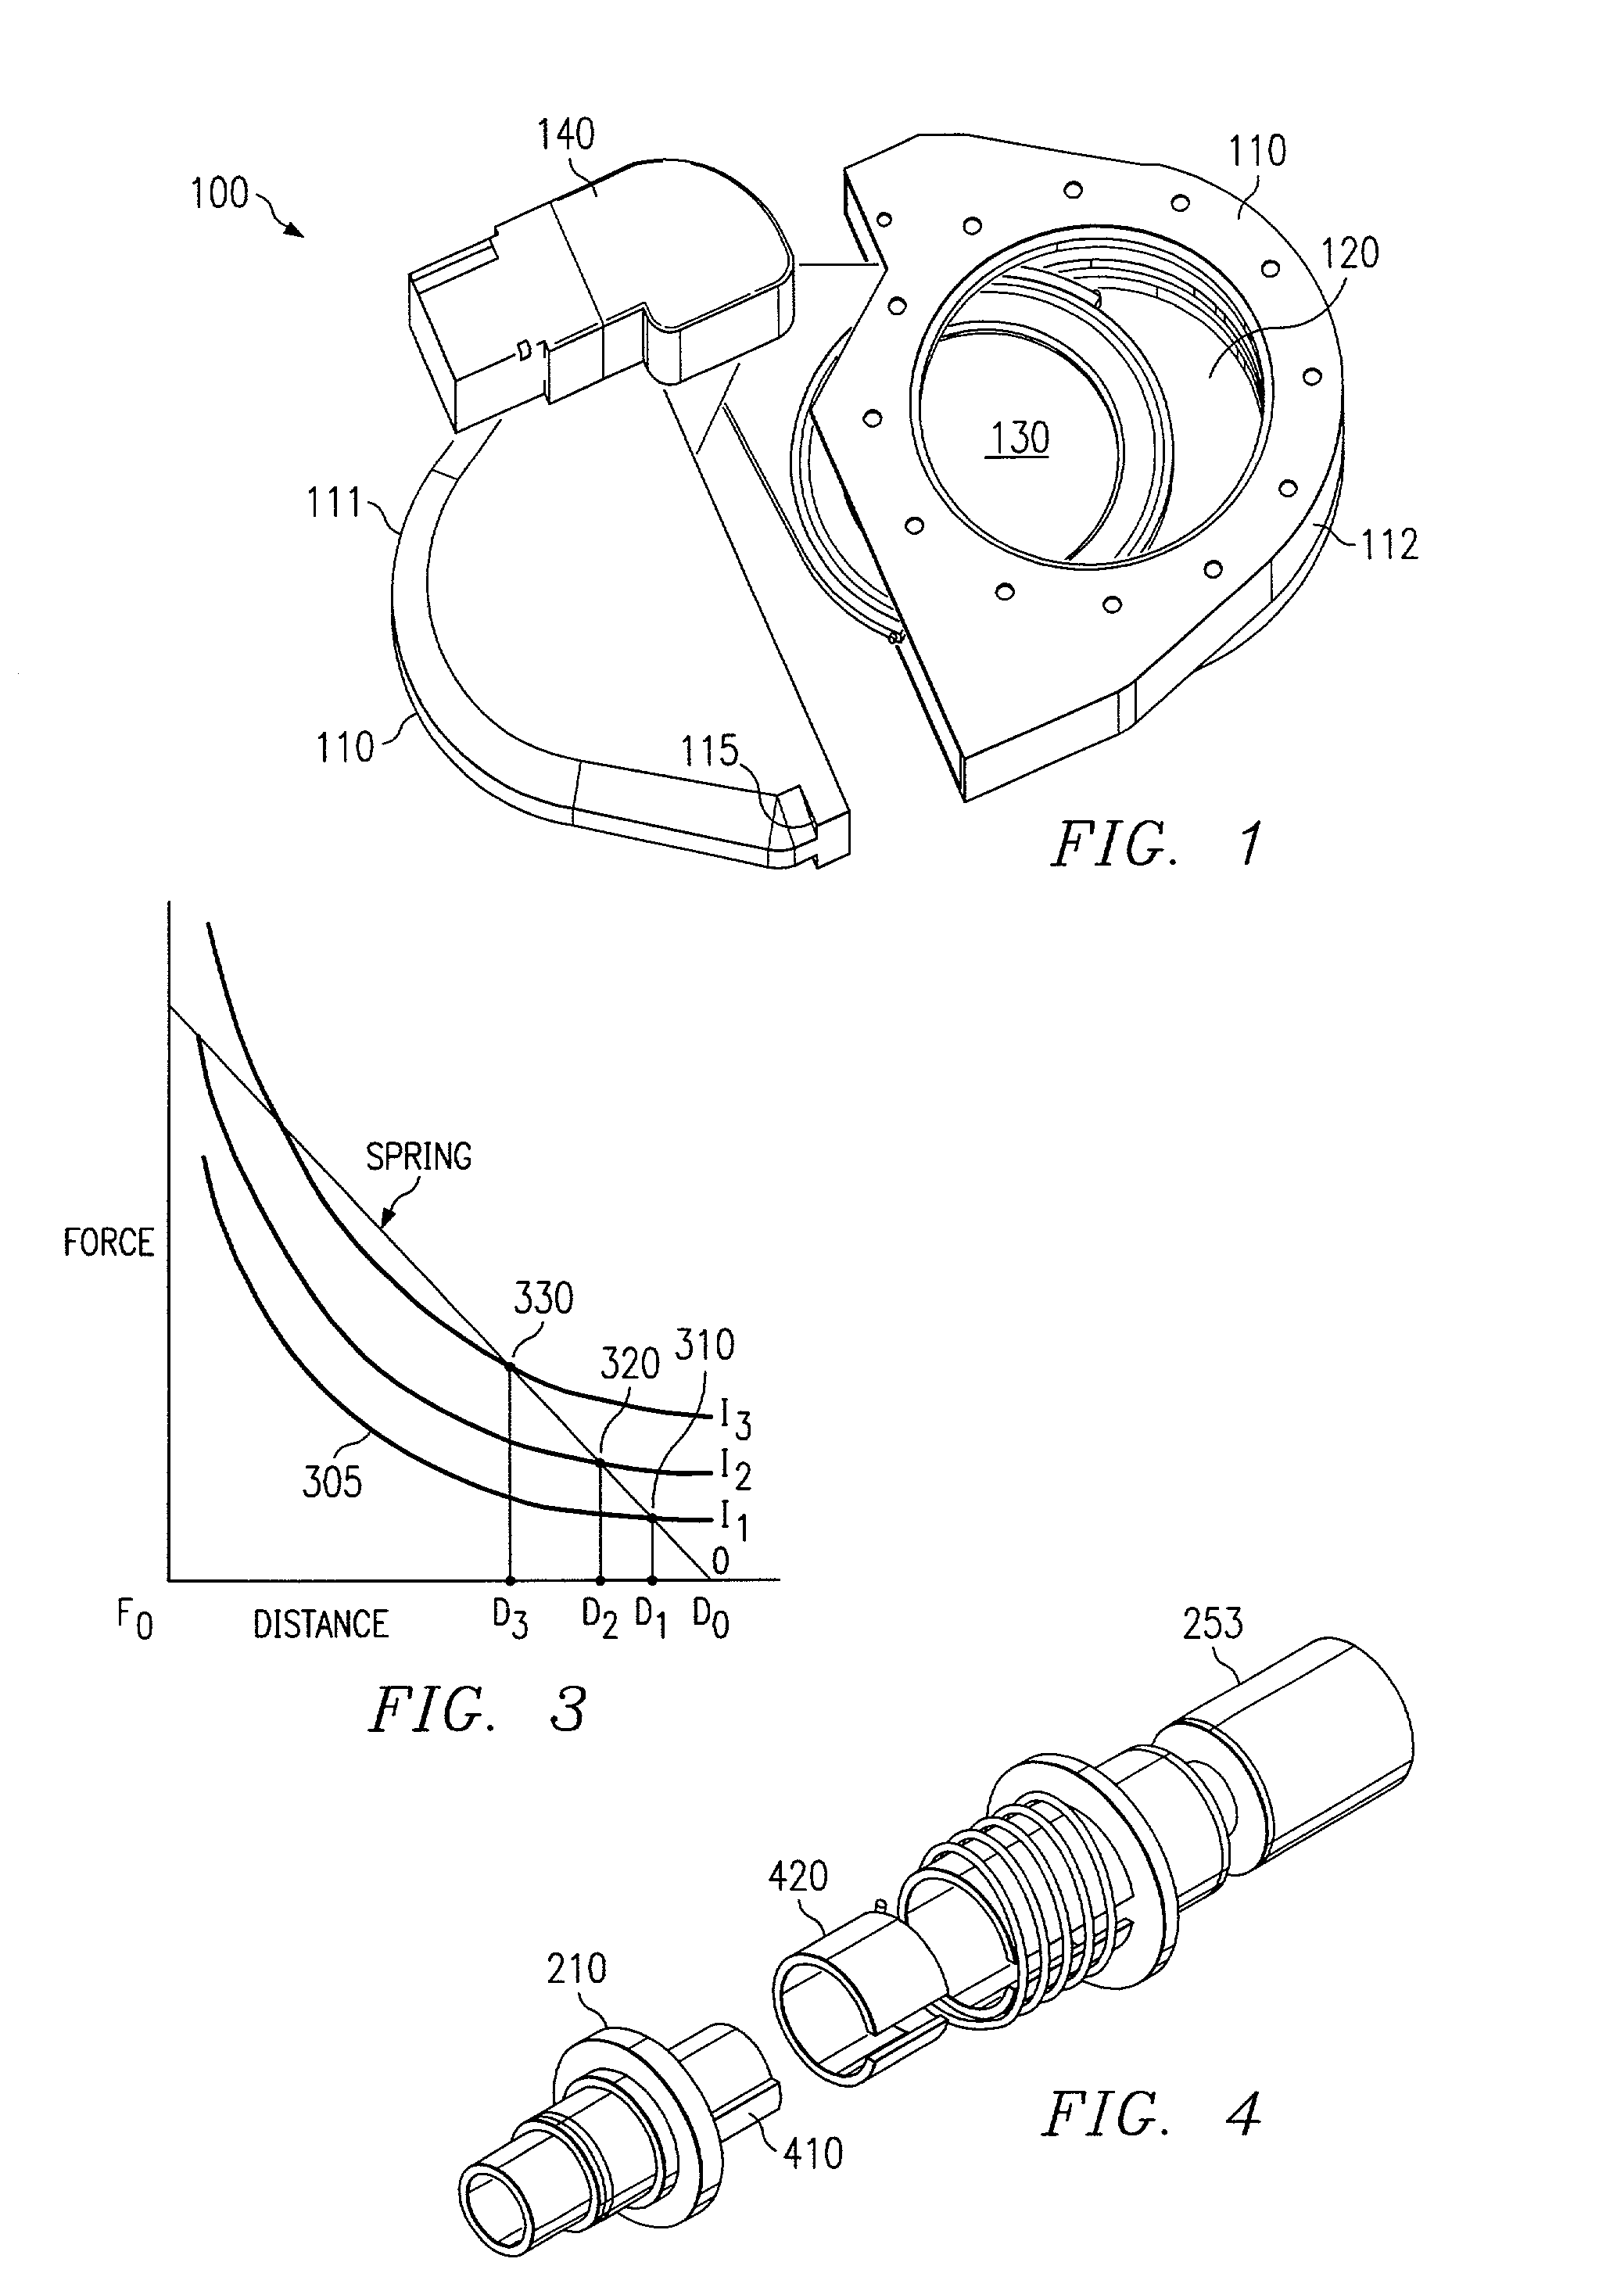 Pendulum valve with a full range of position control